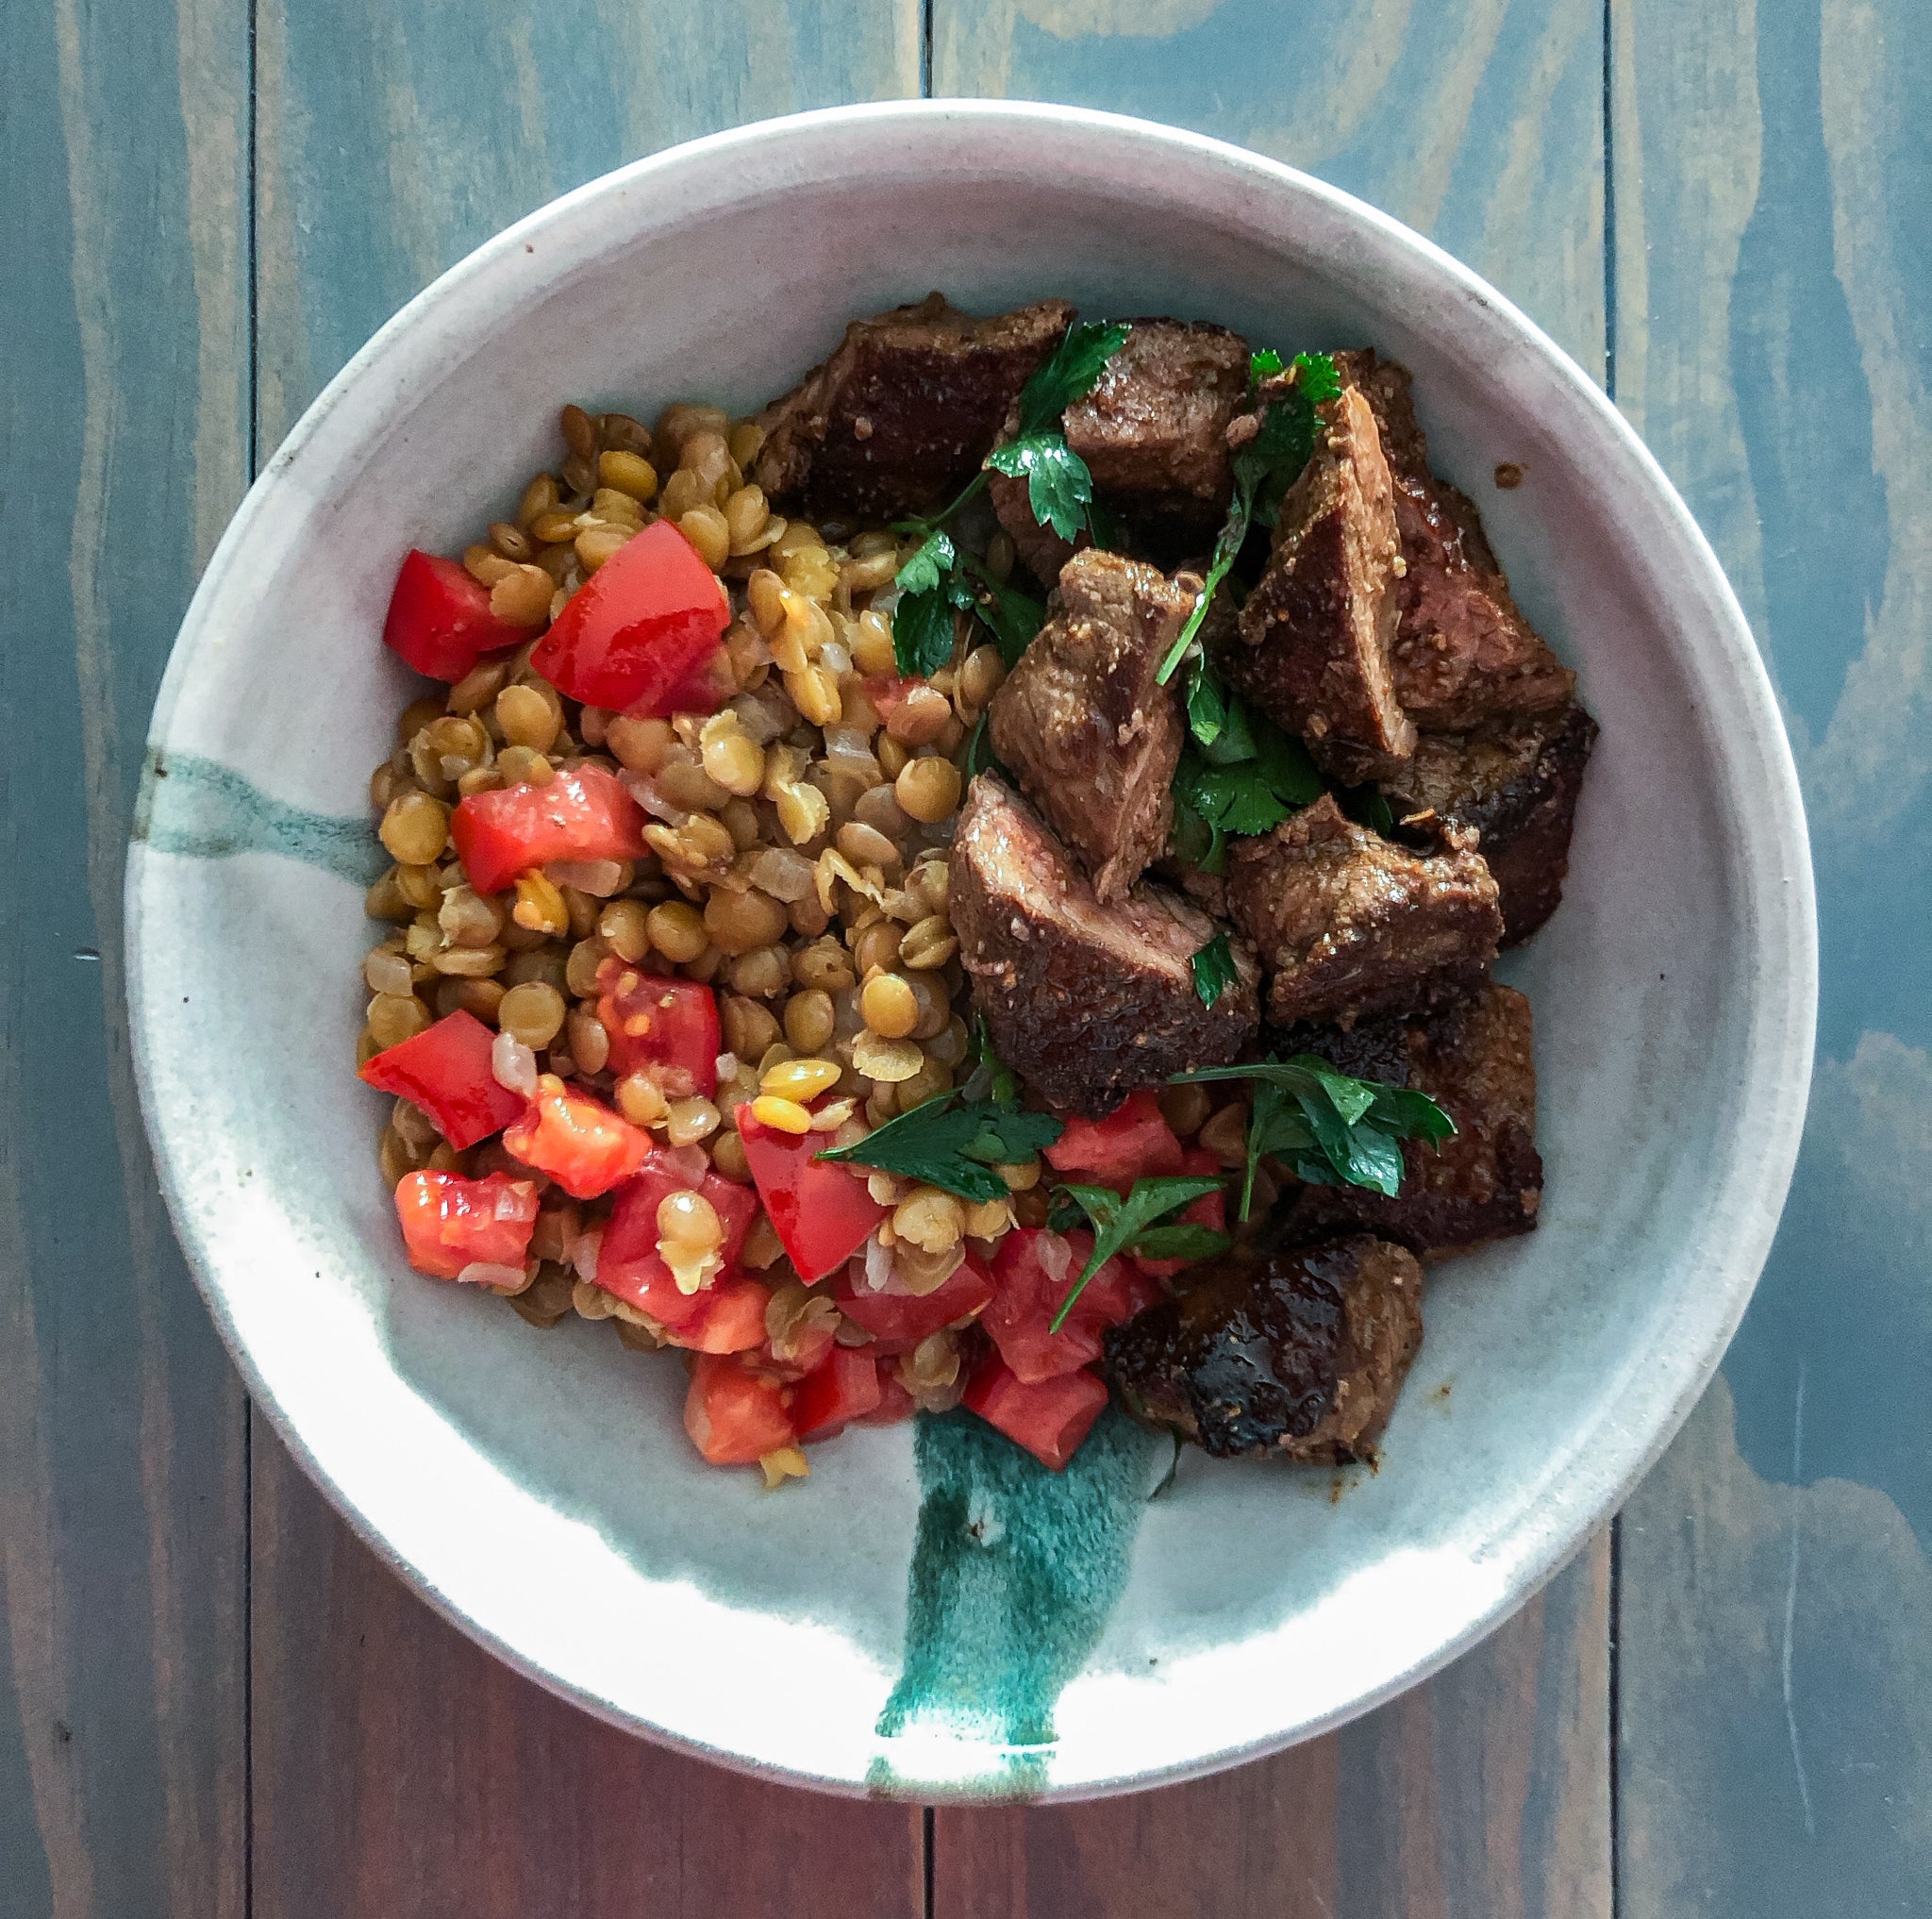 Spiced Beef & Lentils